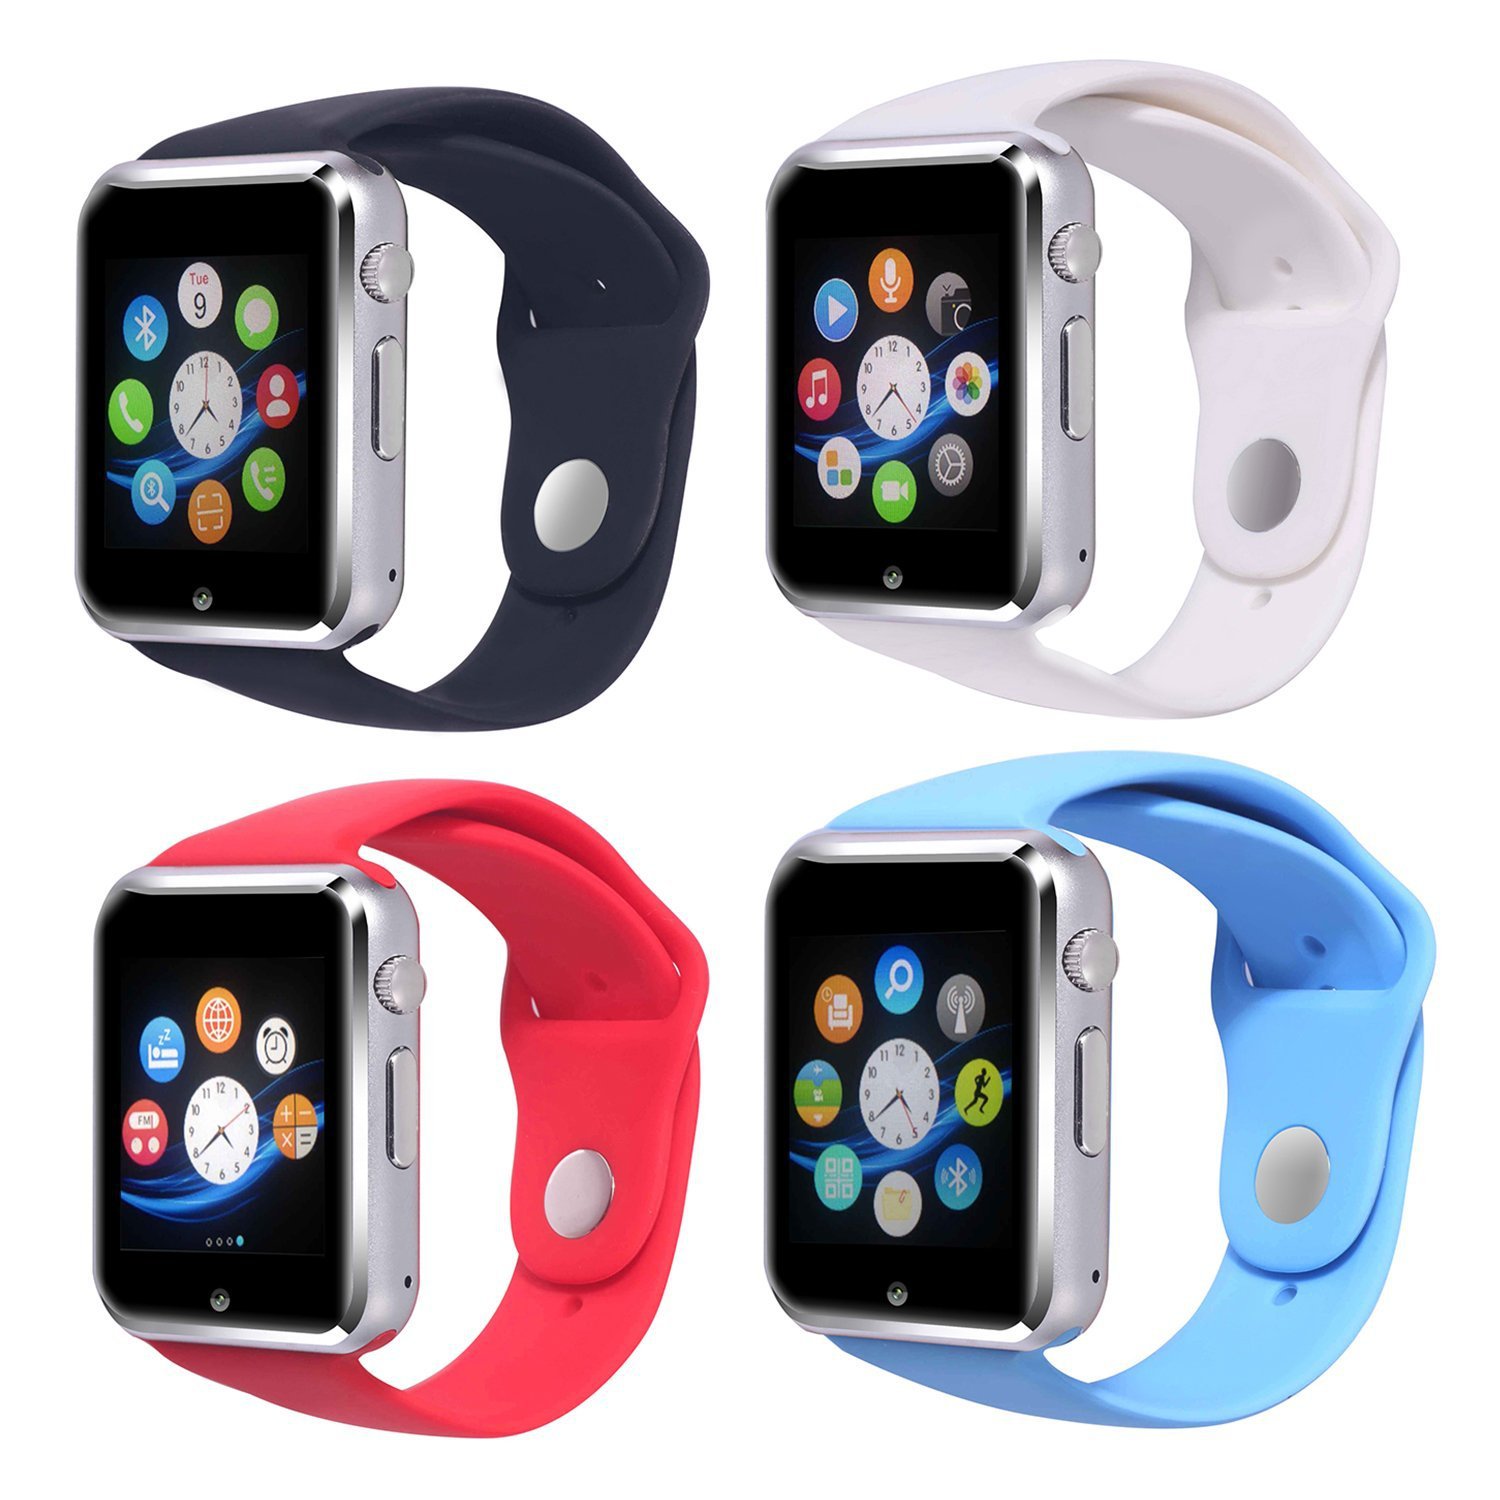 T8 new K8 smart watches 3 g card WiFi bluetooth bracelet wrist wearable touch watch phone call